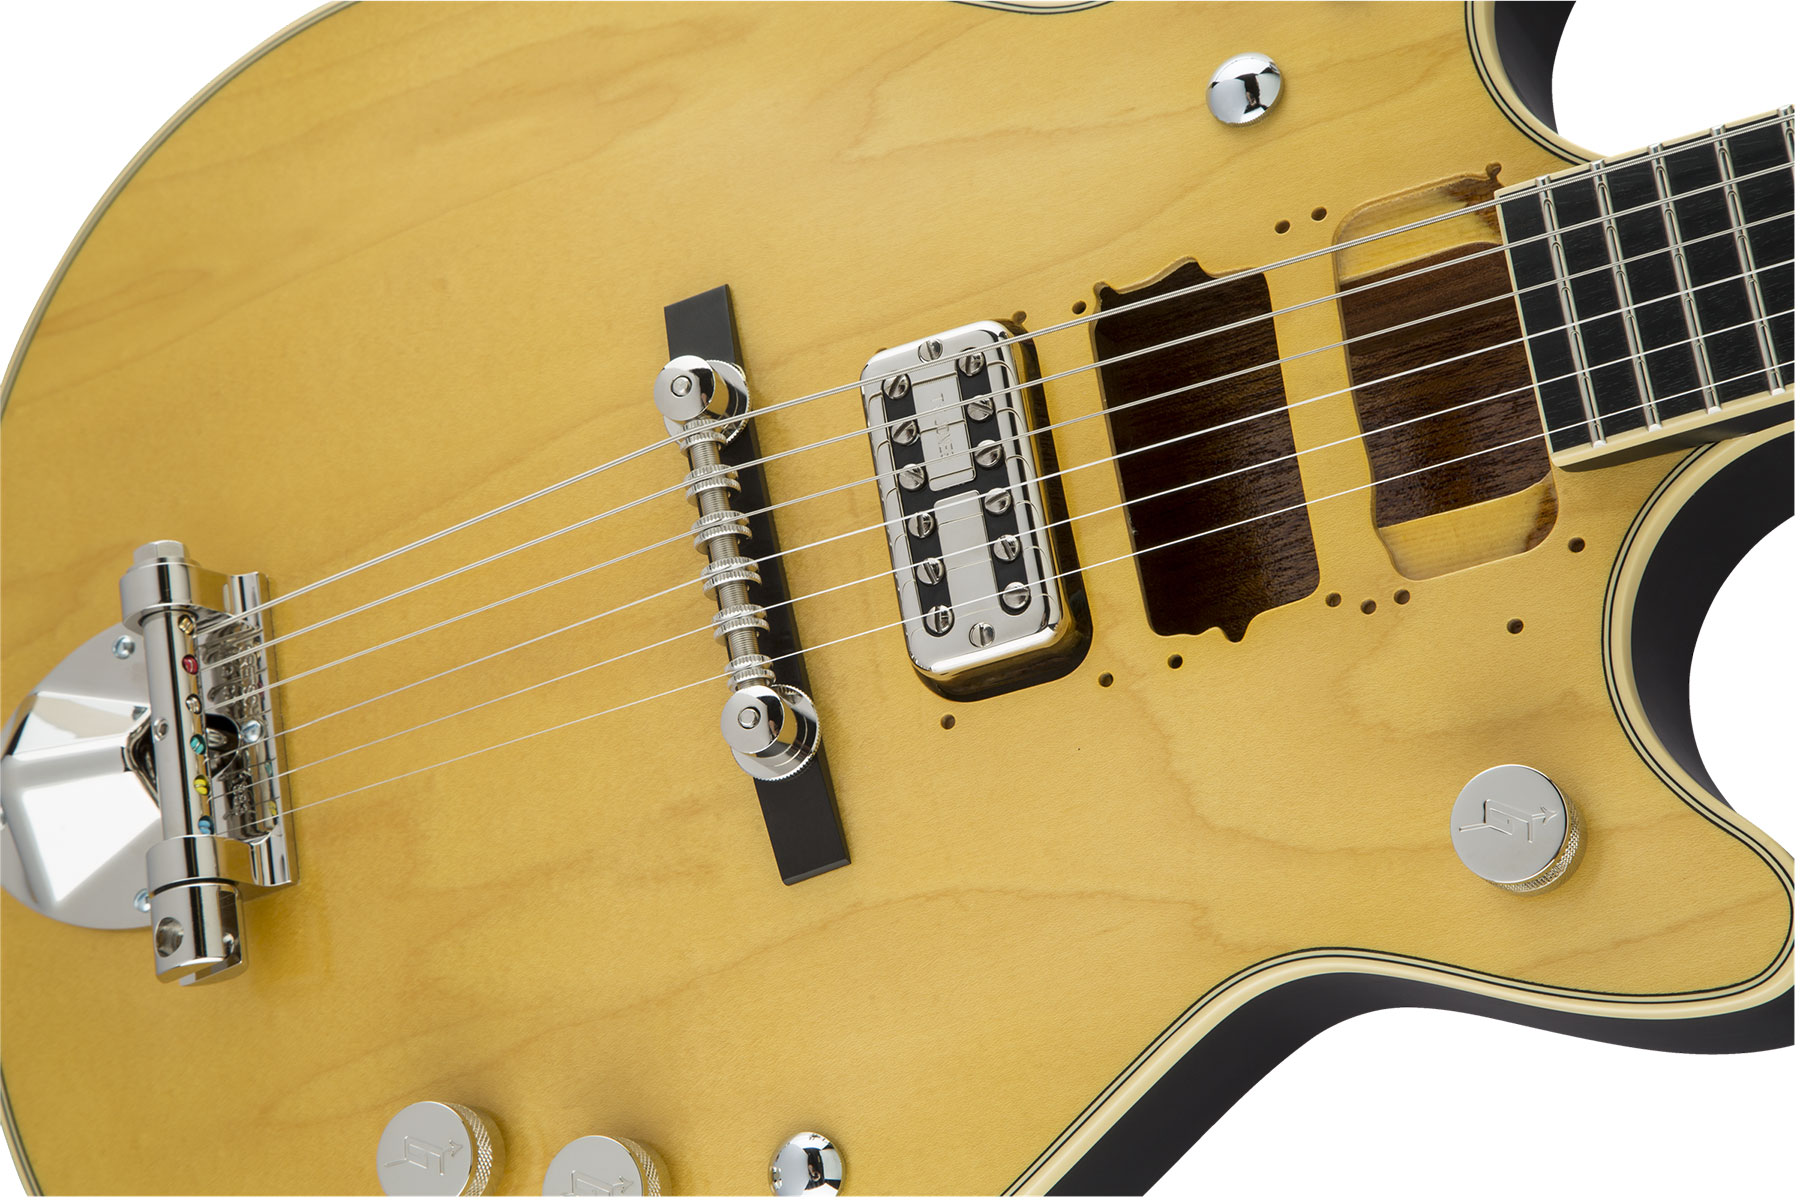 Gretsch Malcolm Young G6131-my Signature Jet Eb - Aged Natural - Double cut electric guitar - Variation 3